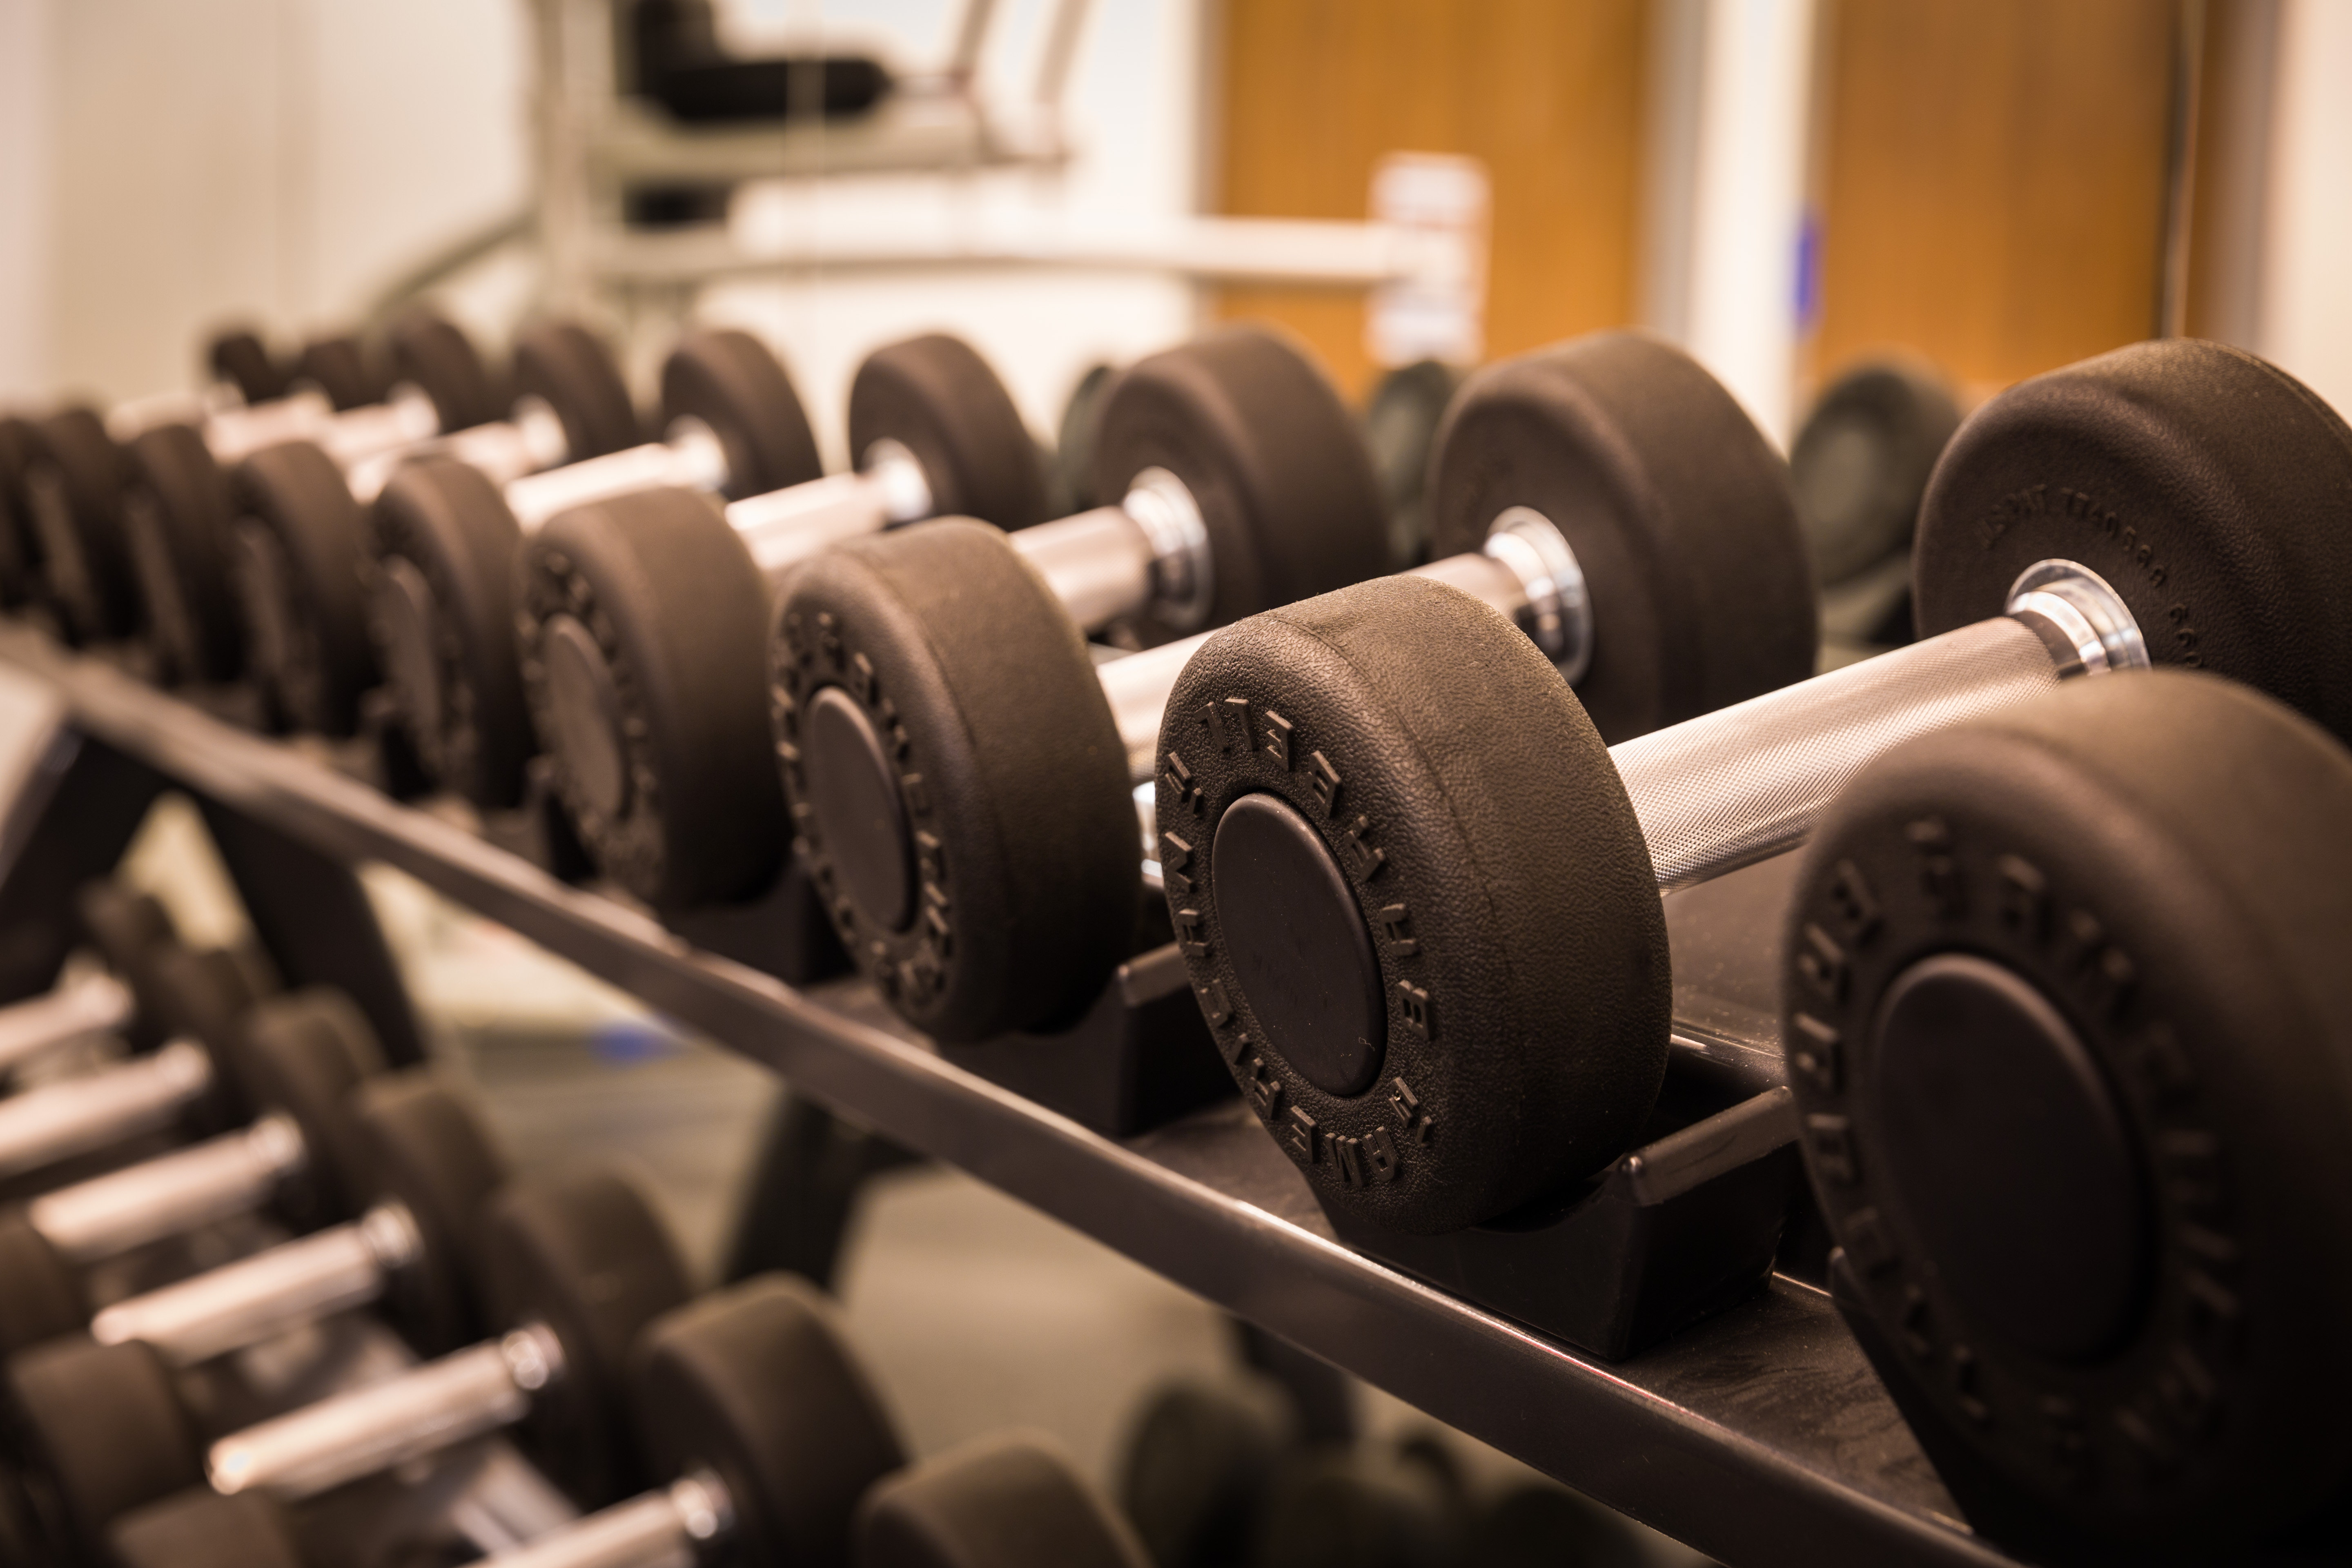 Enjoy our fully equipped gym, open 24/7.